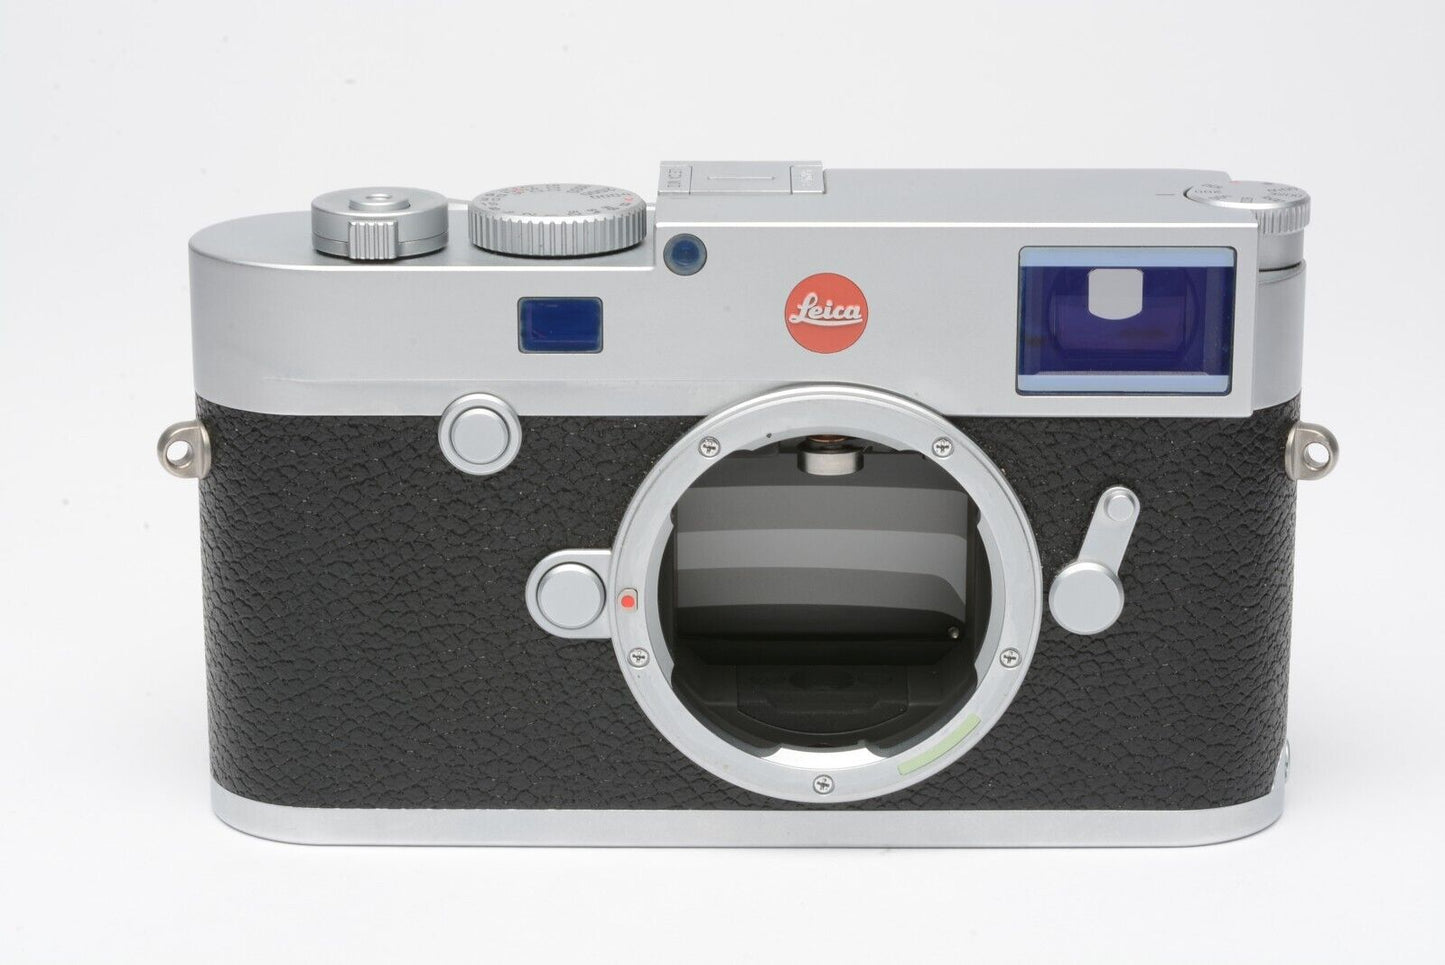 MINT- LEICA M10 CH #20001 DIGITAL BODY, 2BATTS, BOXED+THUMB GRIP BARELY USED USA